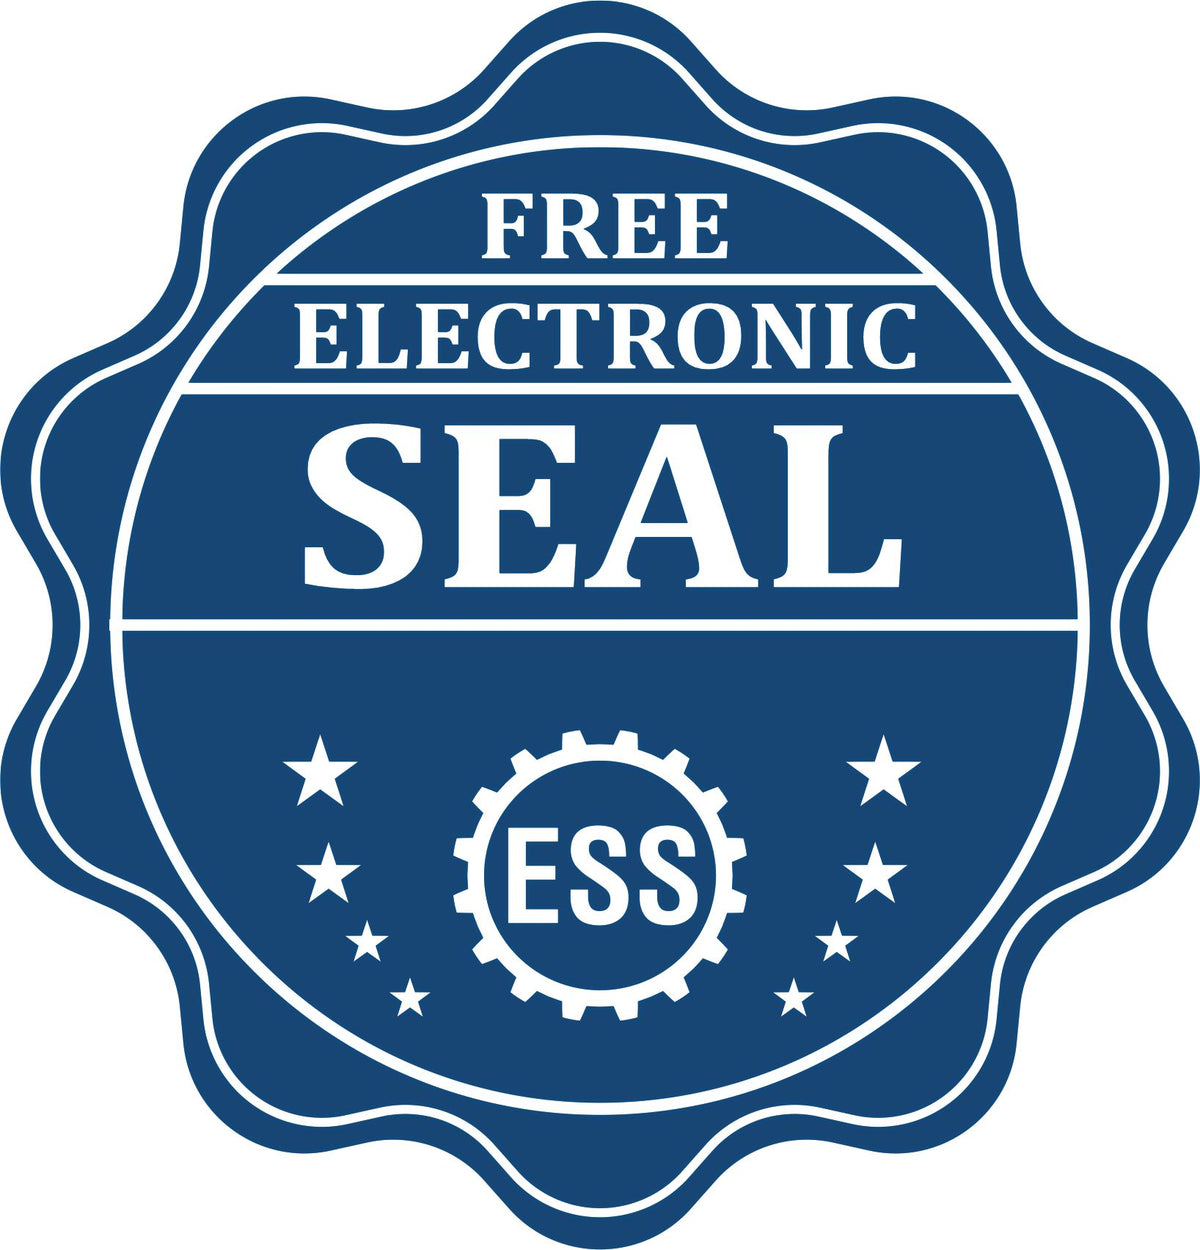 A badge showing a free electronic seal for the State of Guam Extended Long Reach Engineer Seal with stars and the ESS gear on the emblem.